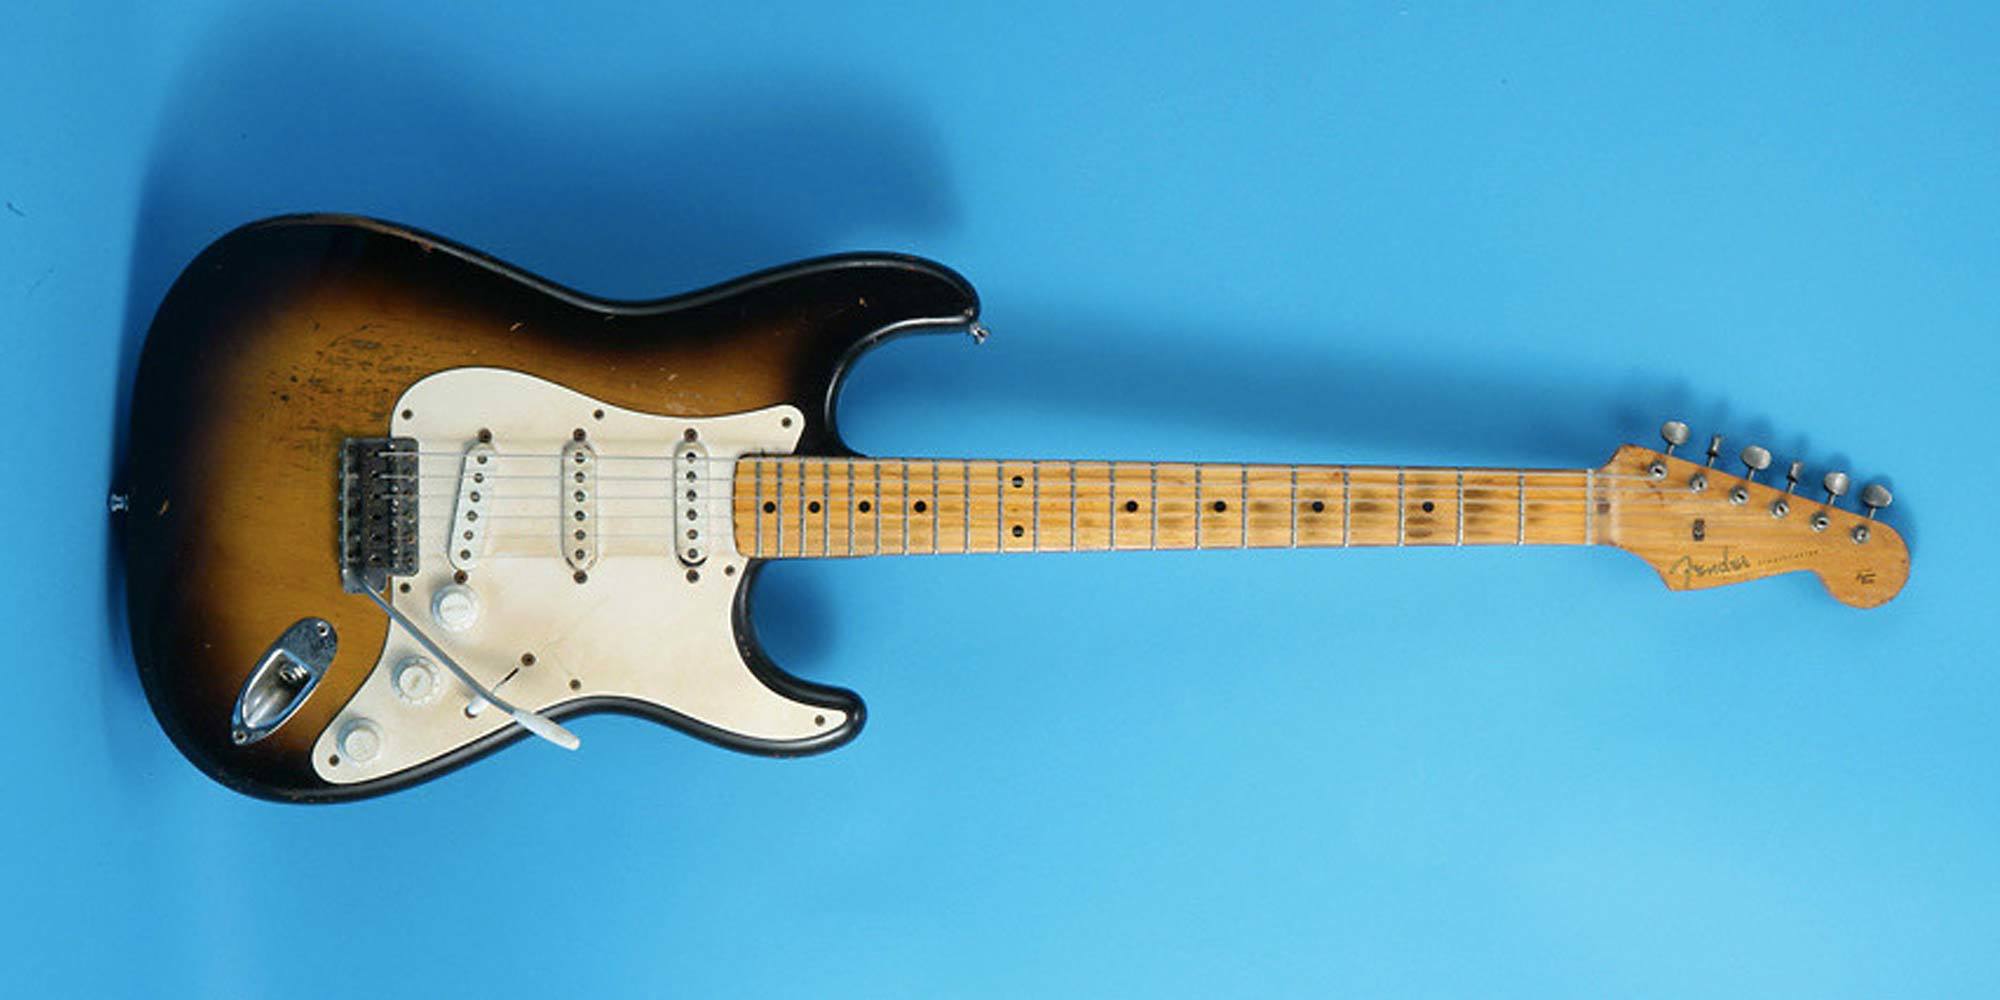 how do you date a fender stratocaster by serial number